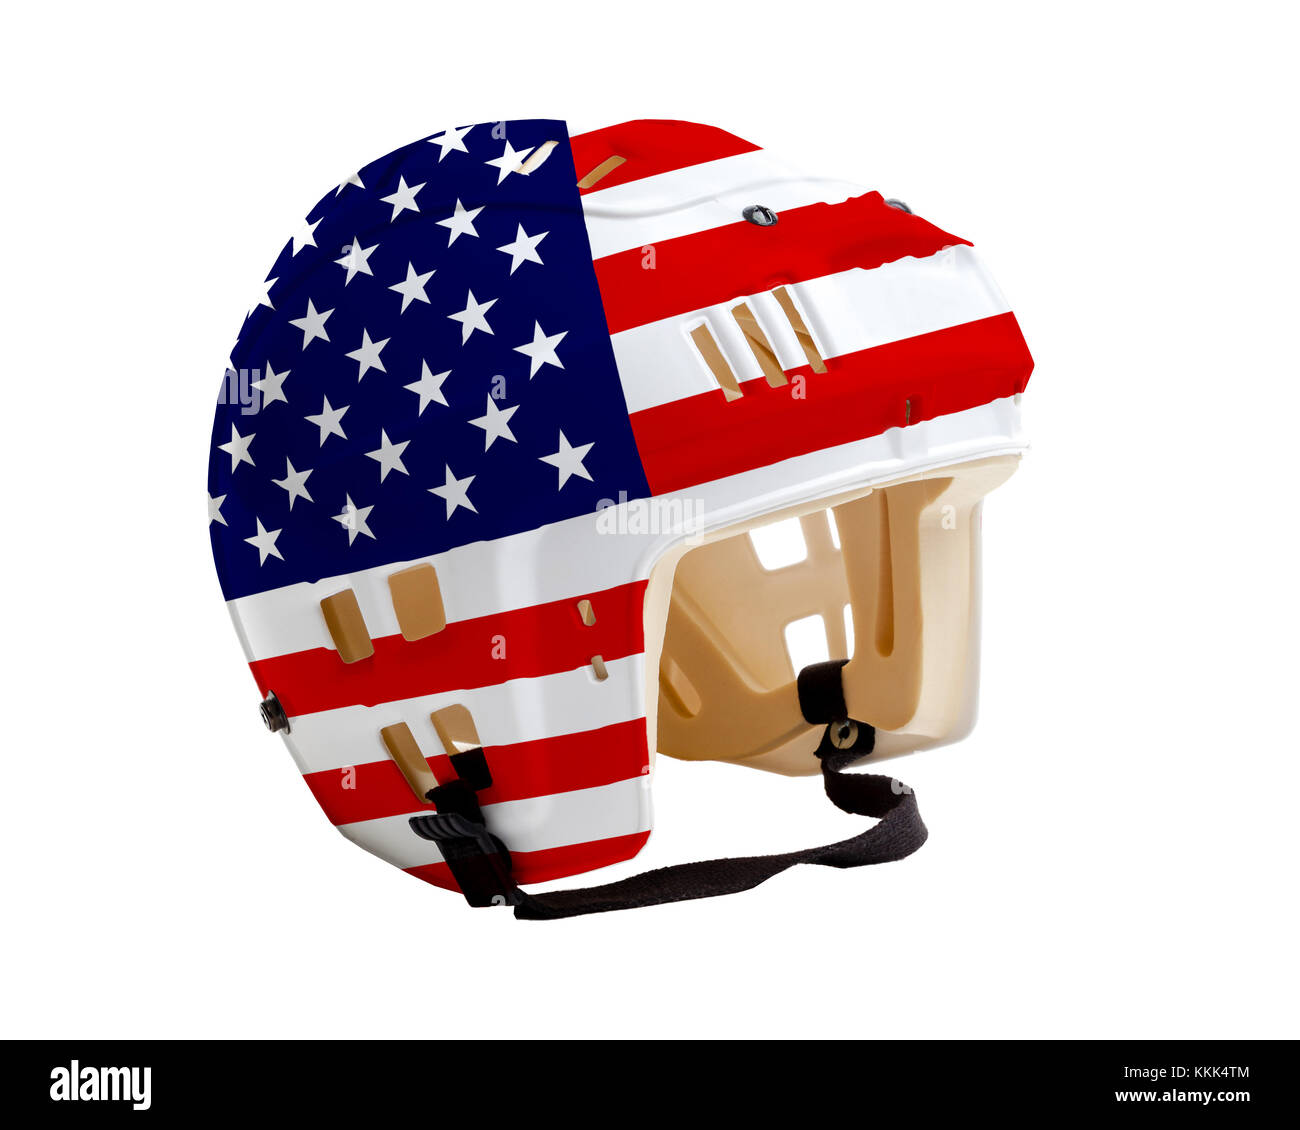 Ice hockey helmet with United States flag painted on it. Isolated on white background. USA is one of the world's major ice hockey nations. Stock Photo